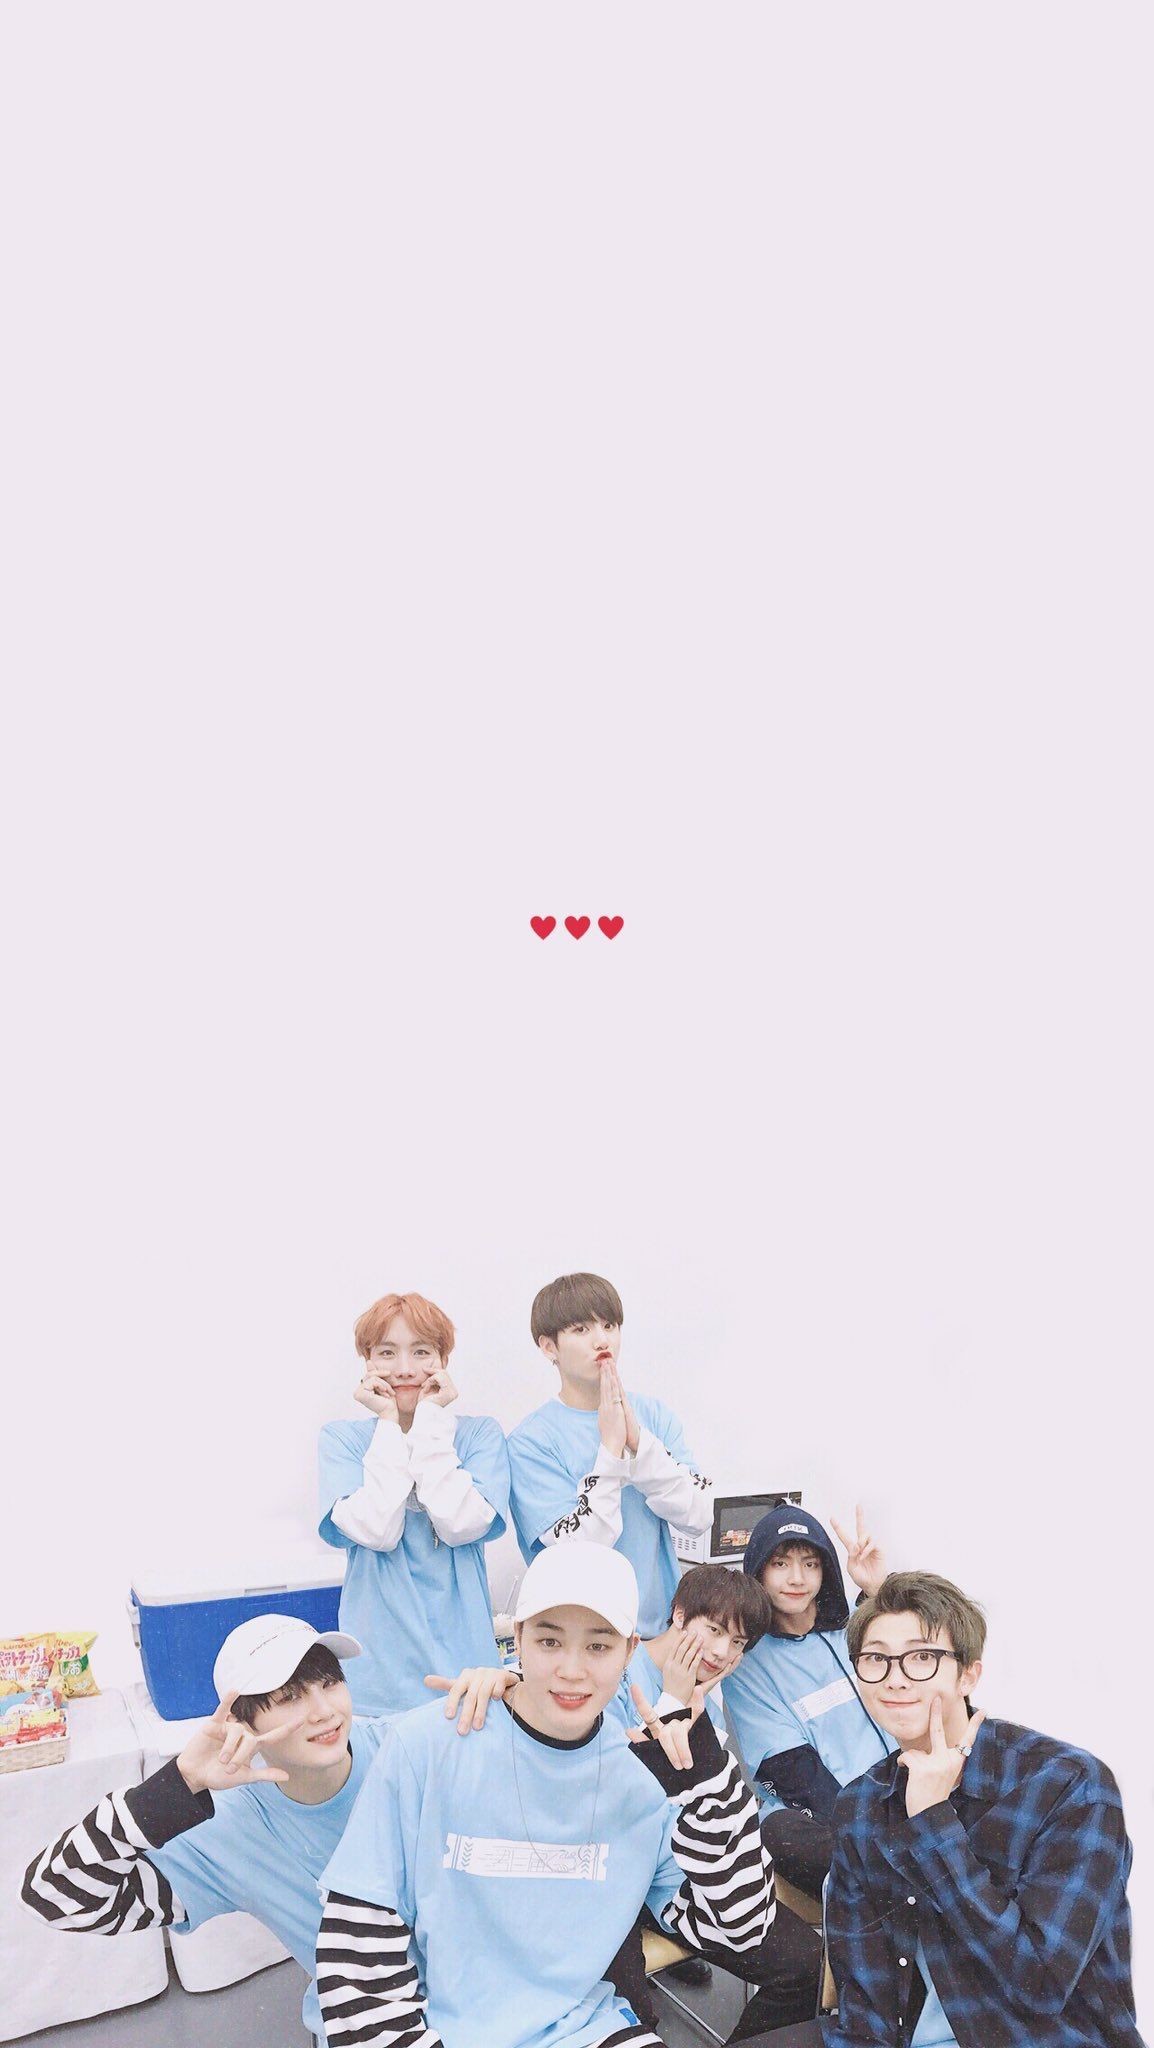 bts wallpaper,people,smile,photography,gesture,happy